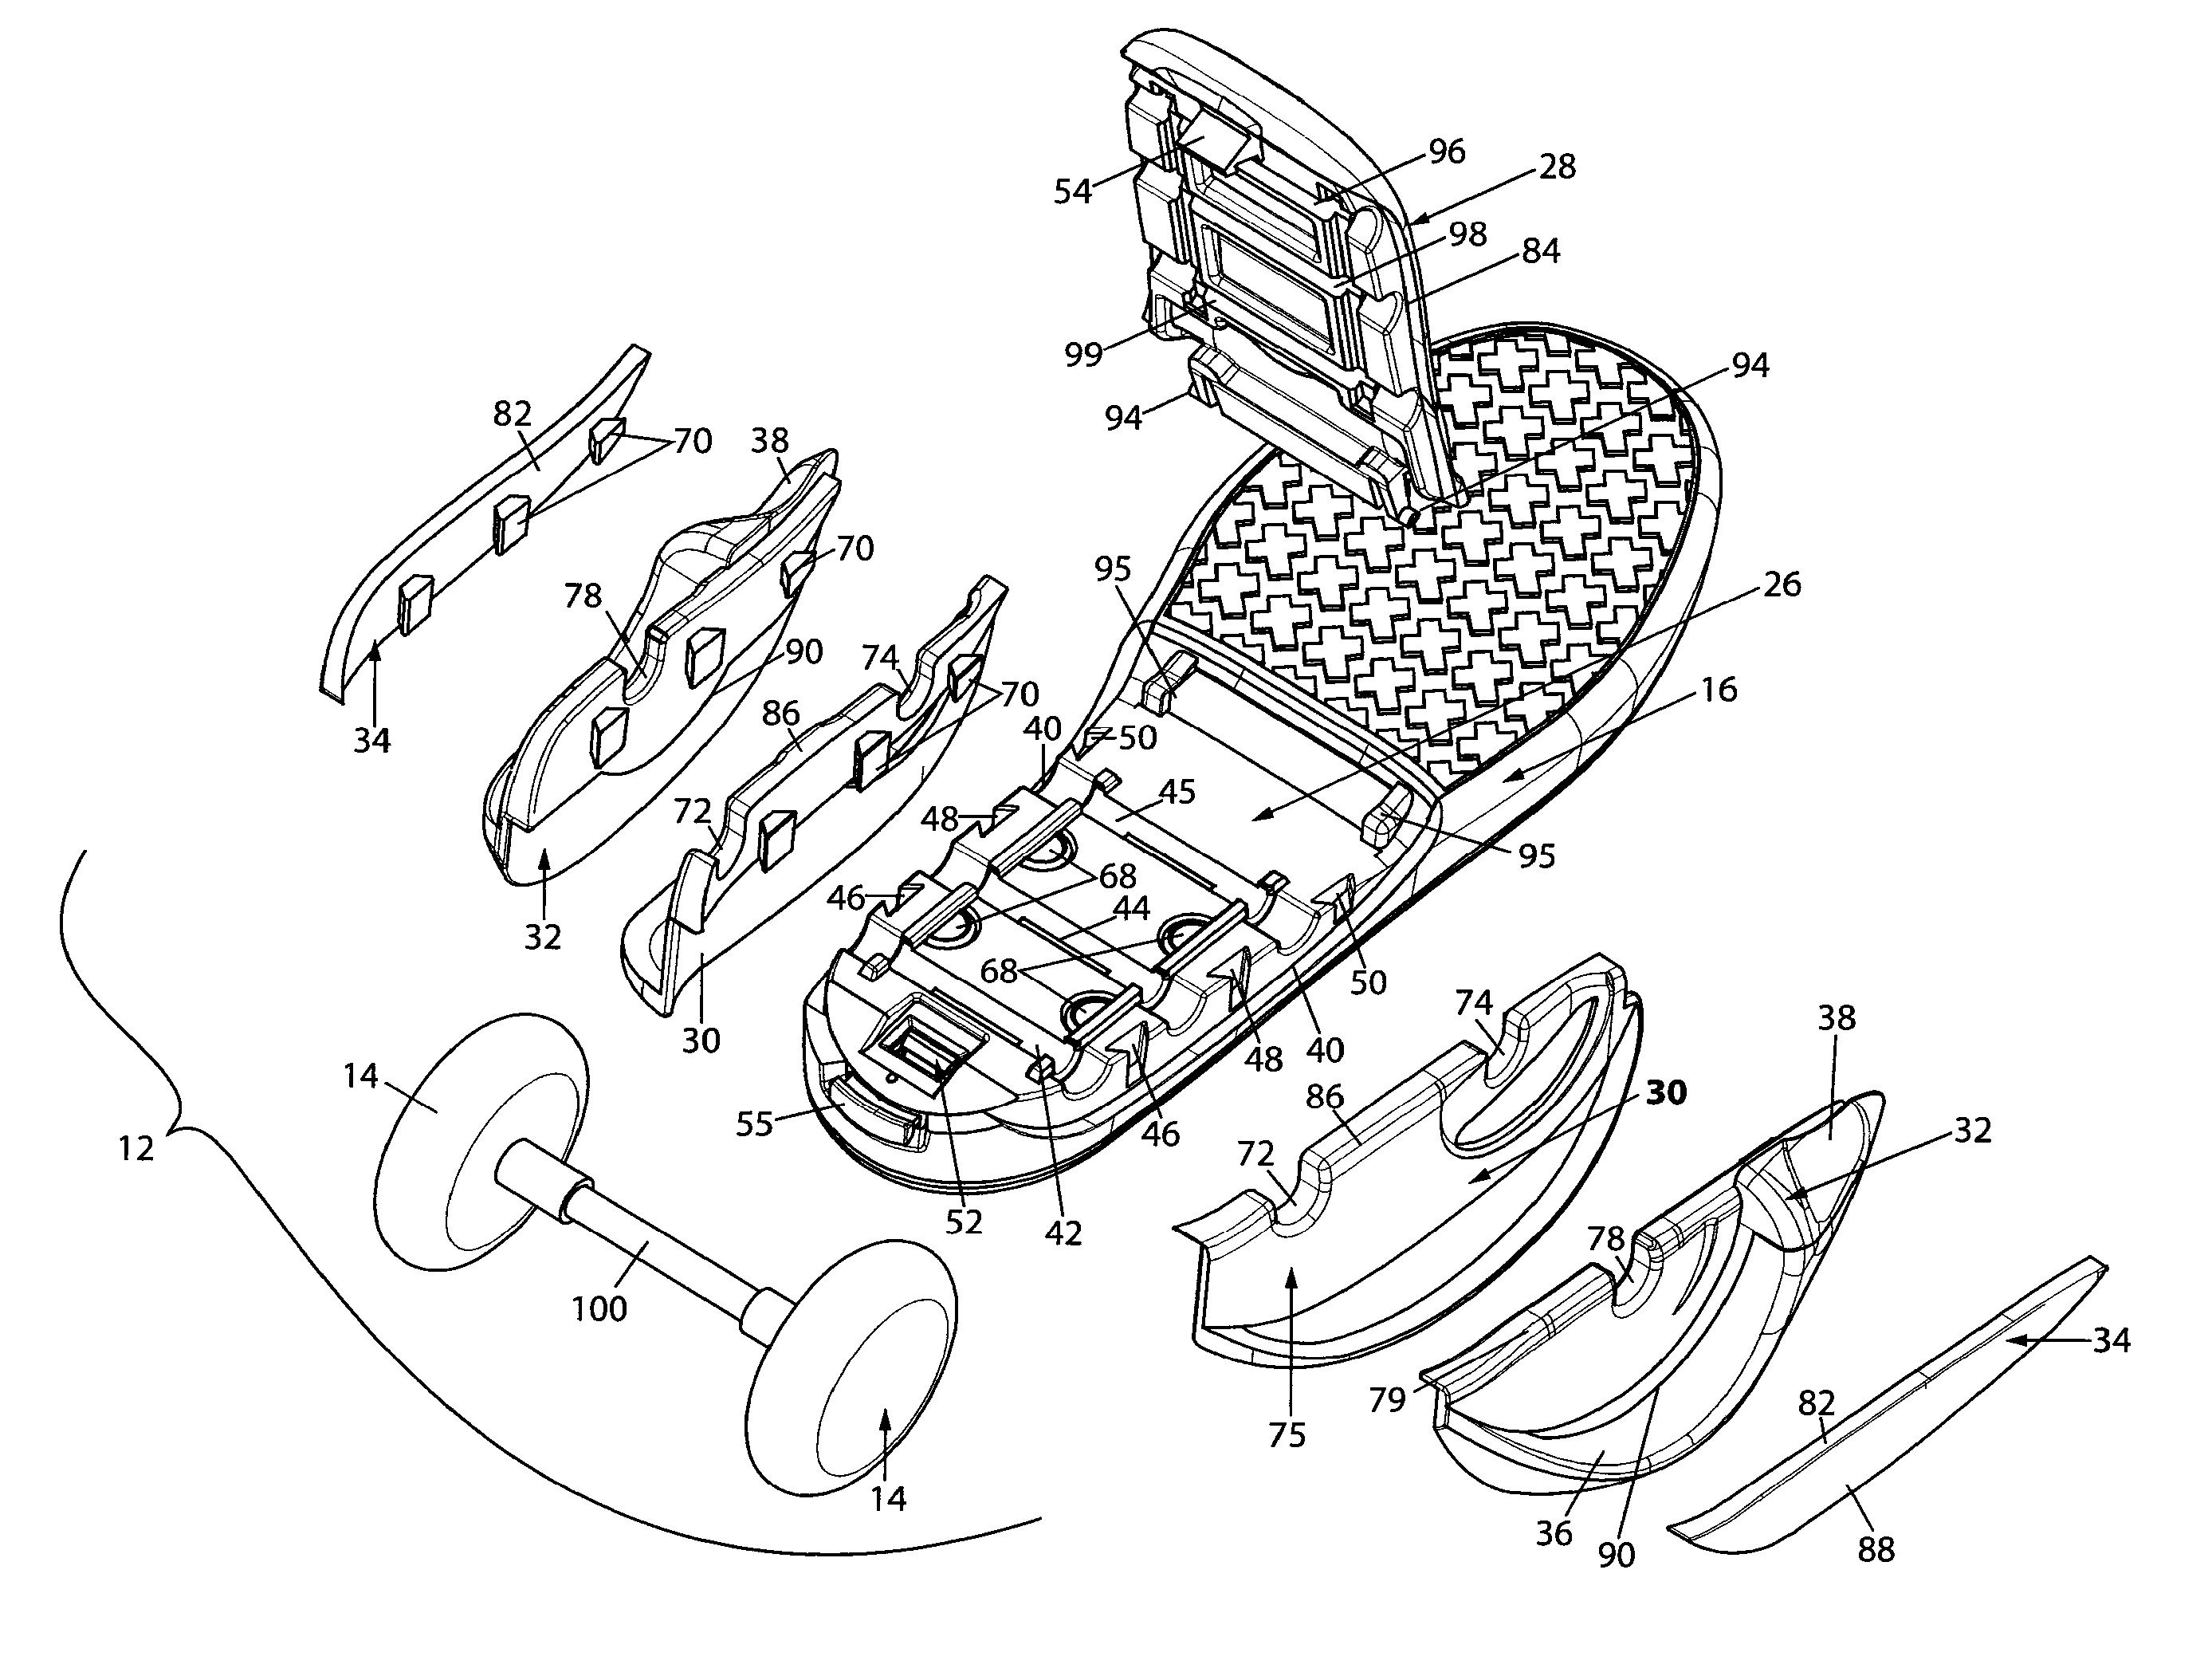 Footwear with adjustable wheel assembly